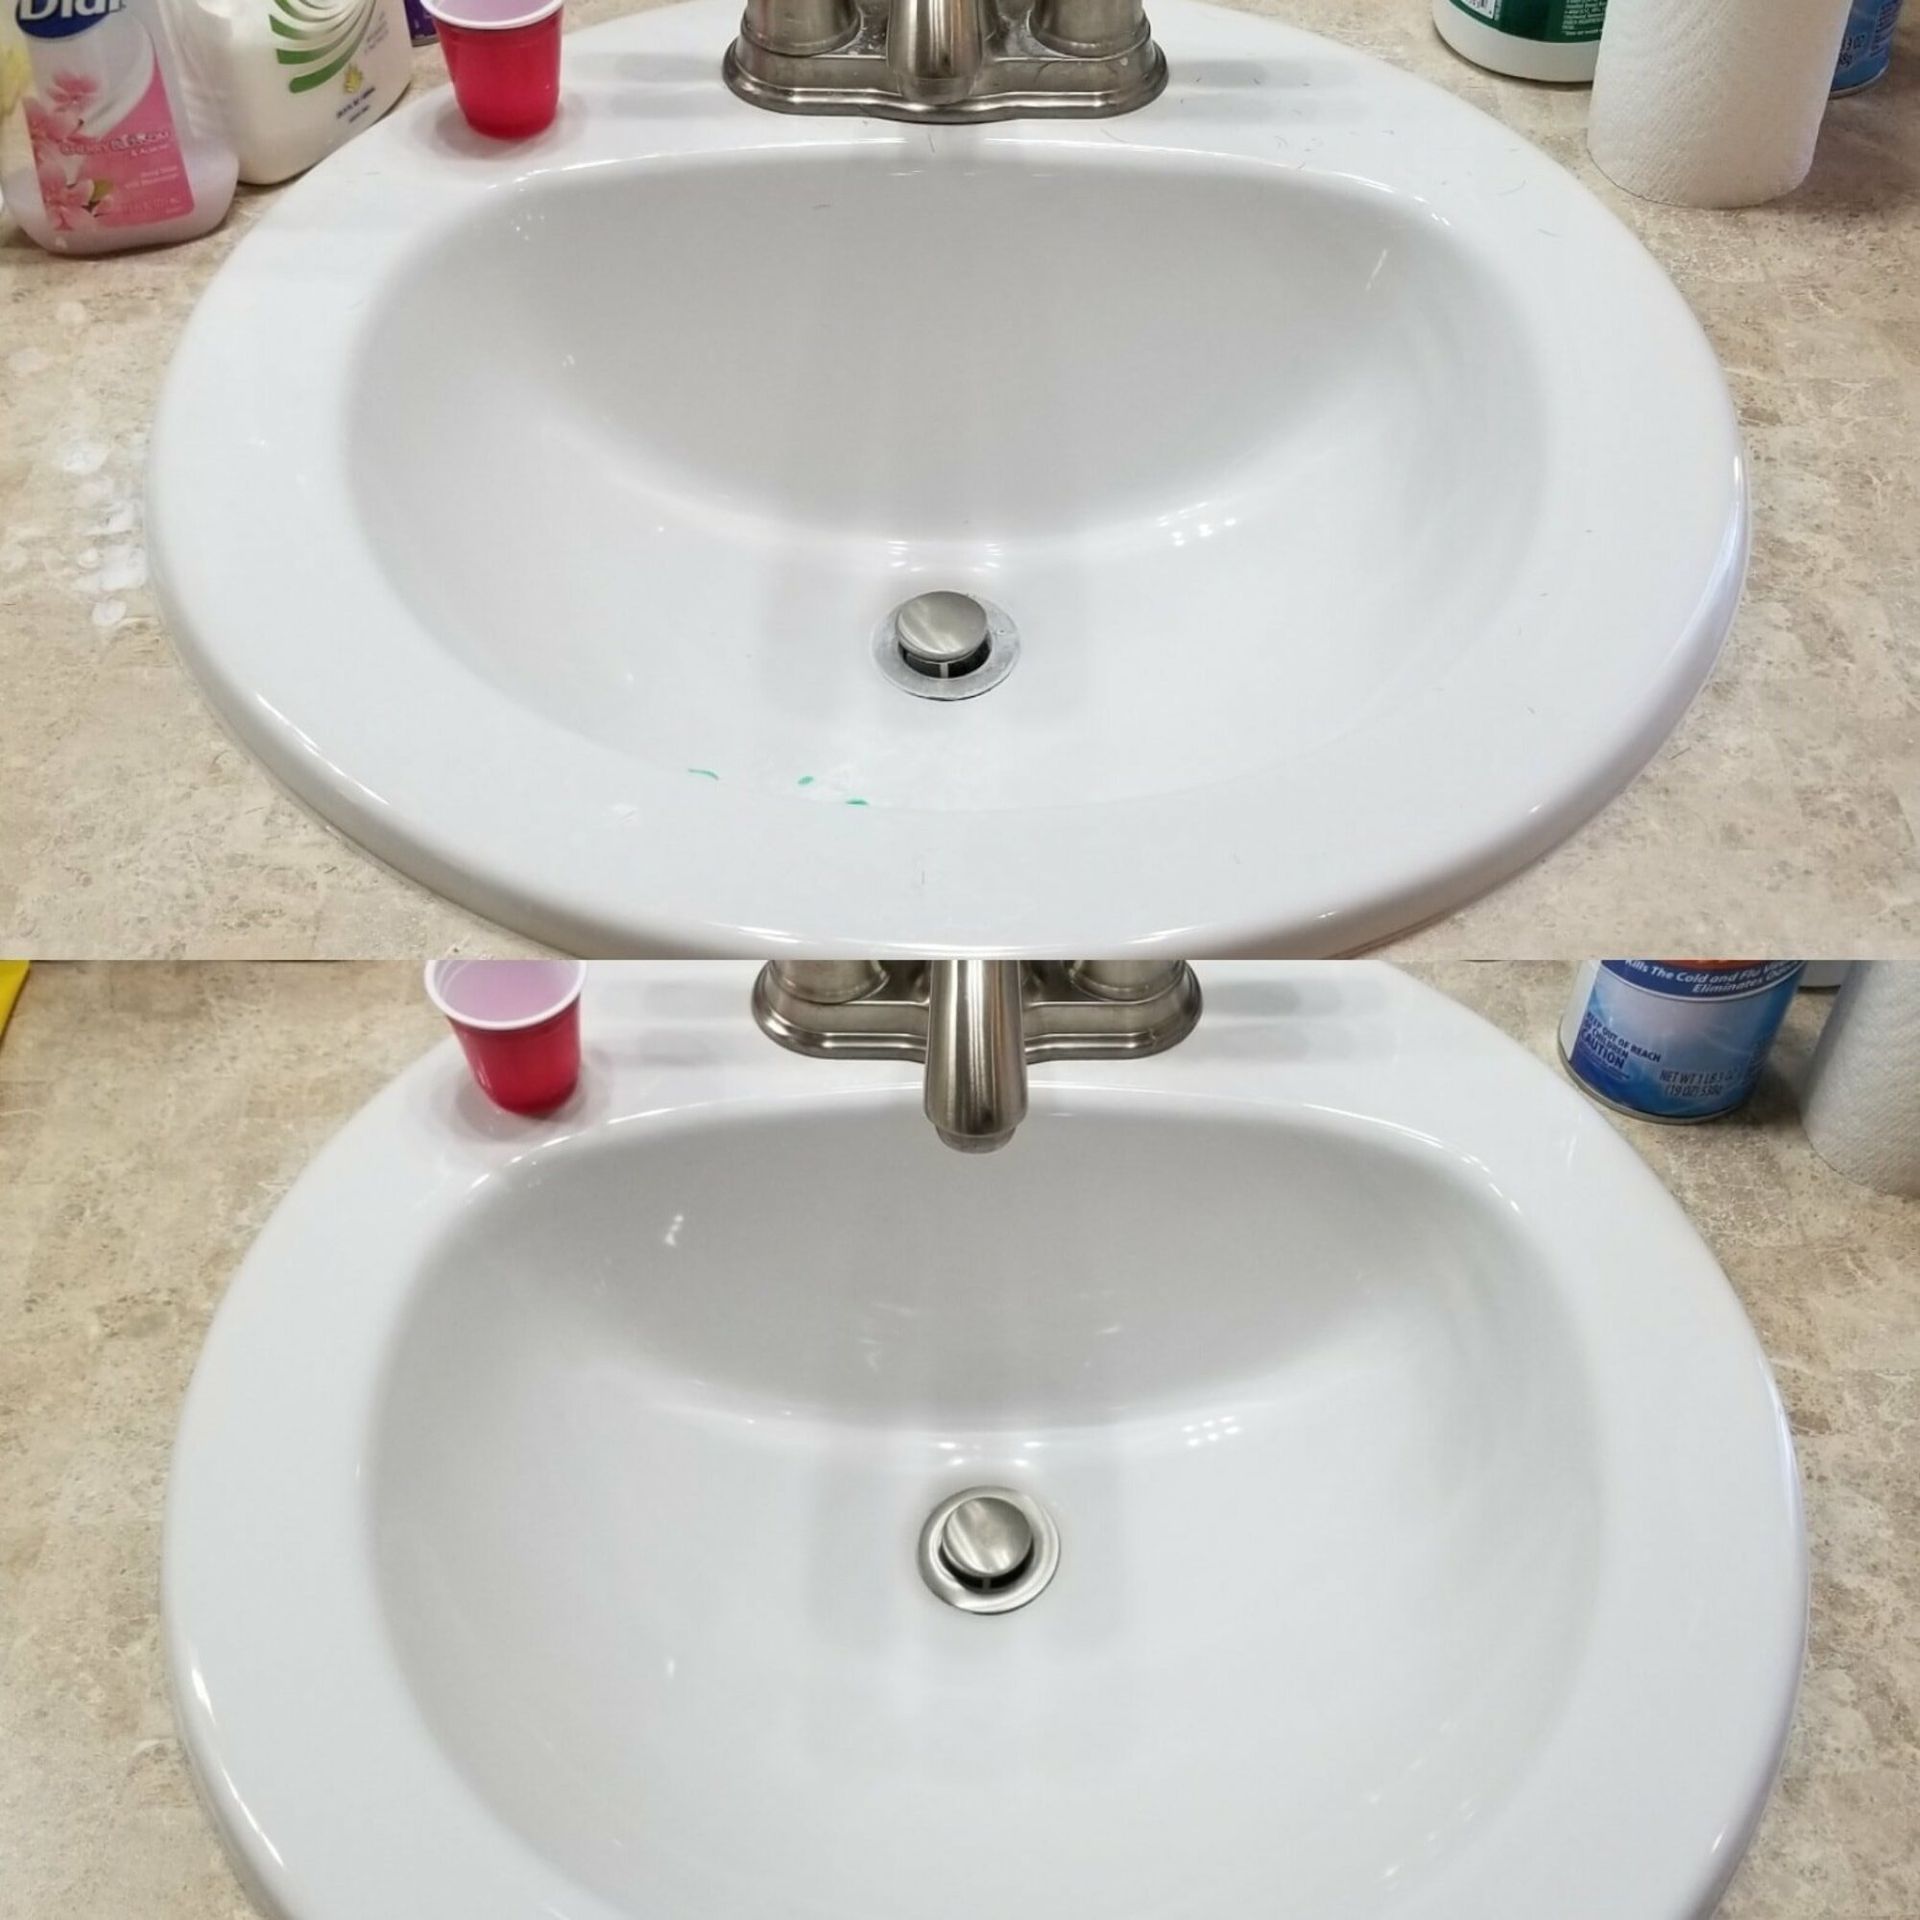 A before and after picture of a bathroom sink.